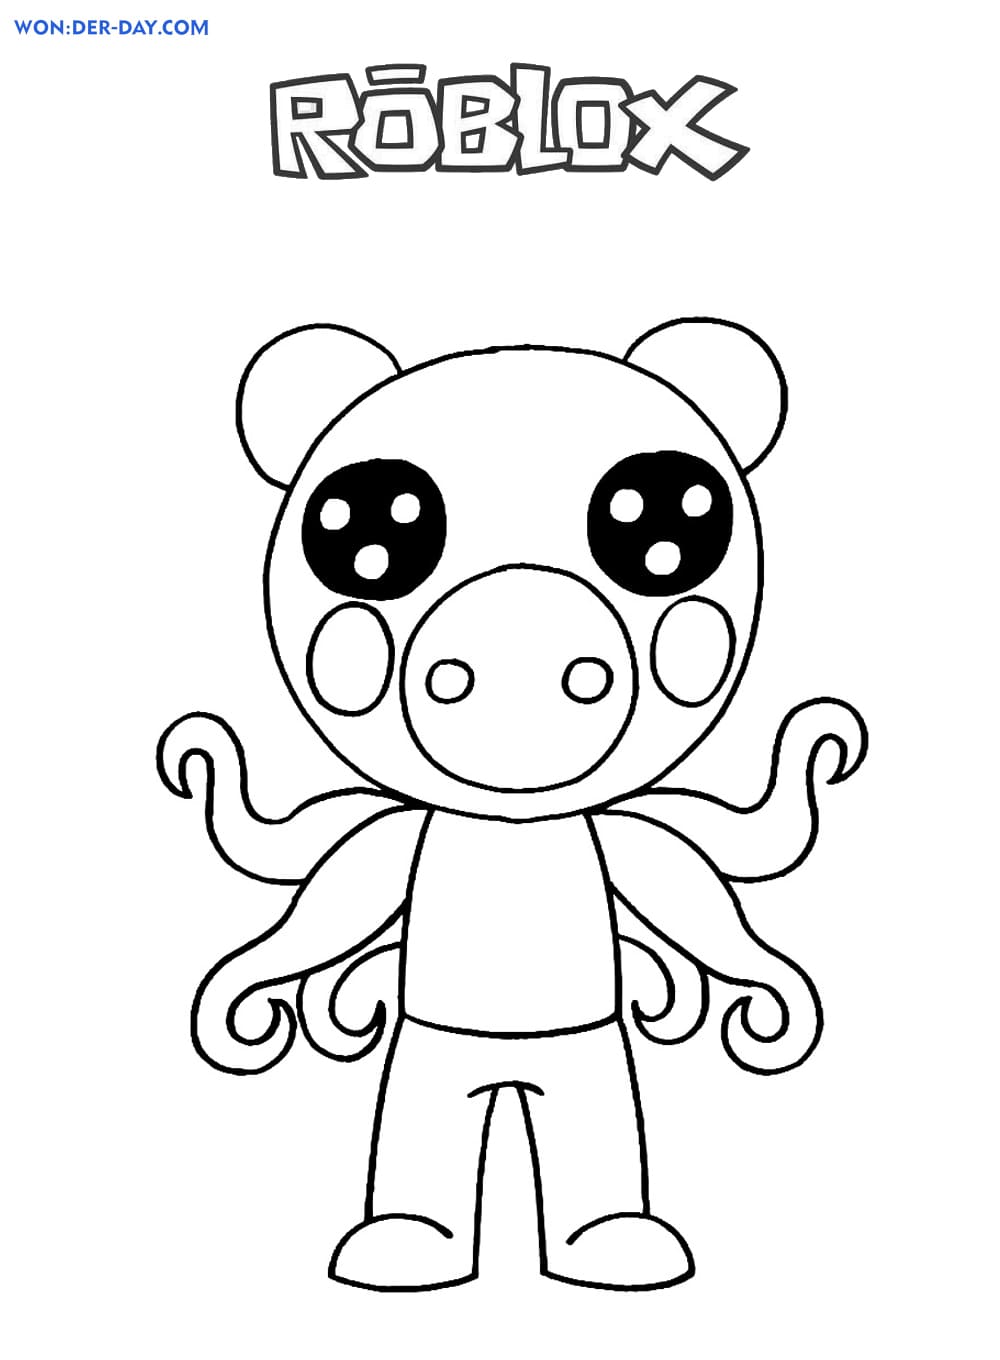 Piggy Roblox Coloring Pages Wonder Day Coloring Pages For Children And Adults - roblox coloring sheets piggy